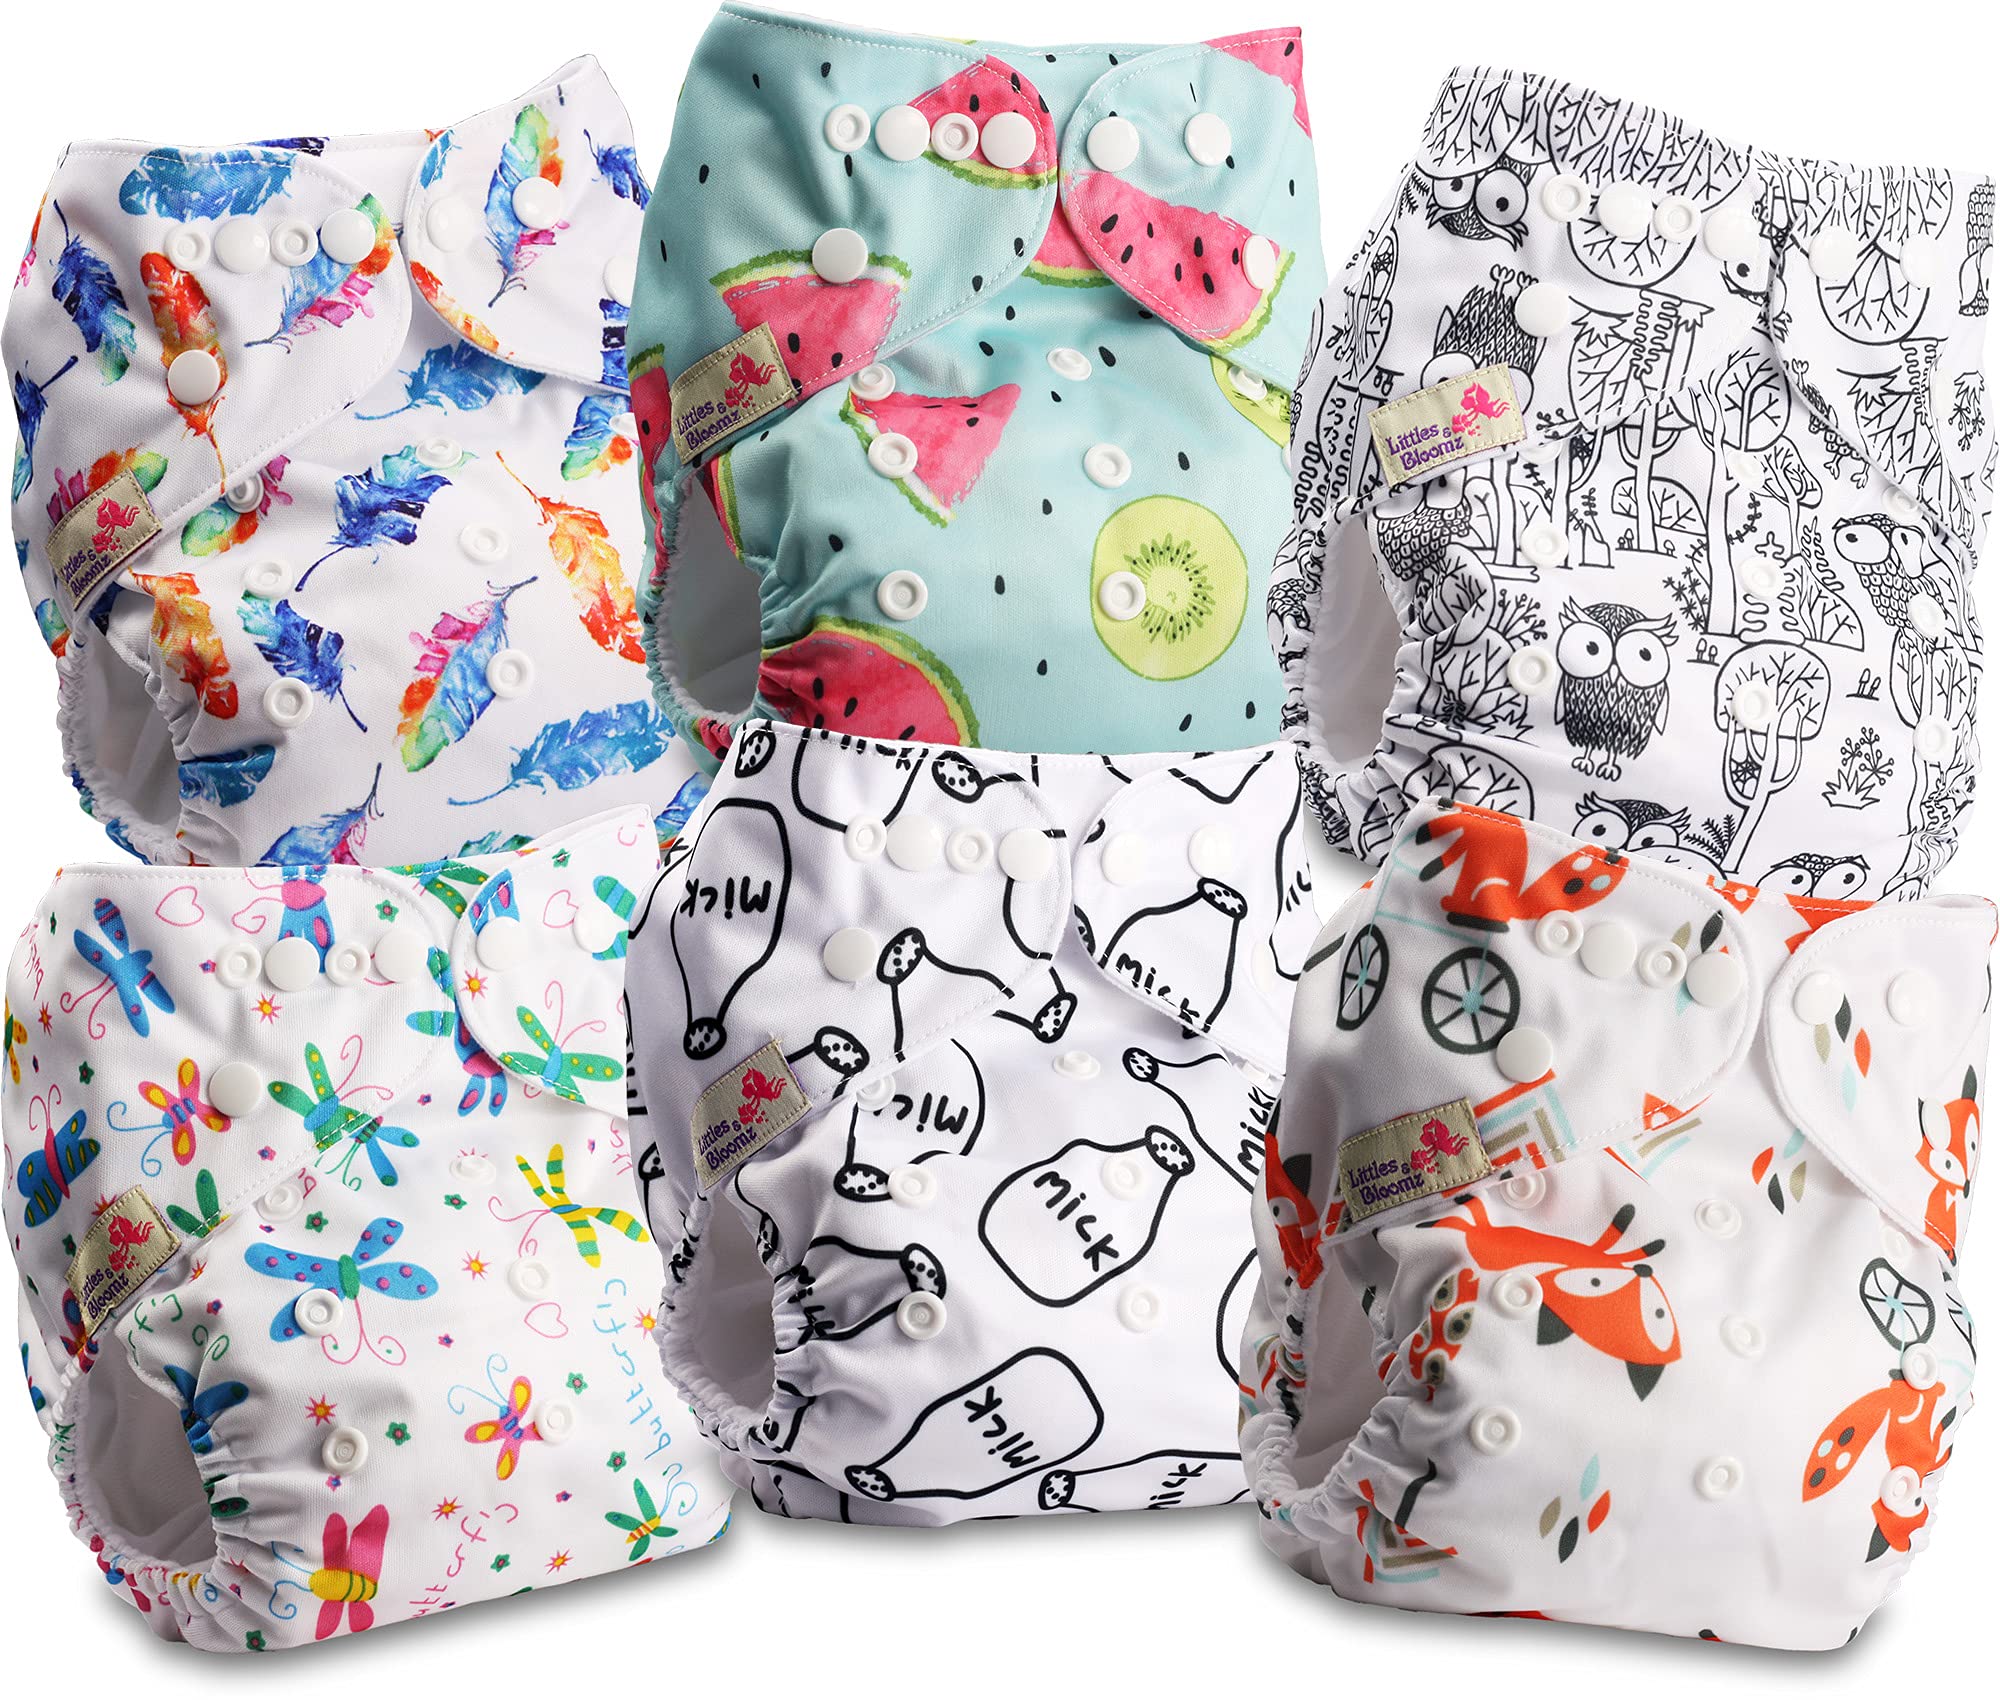 Safe-O-Kid Reusable Baby Cloth Diaper, Washable Pocket Nappy with